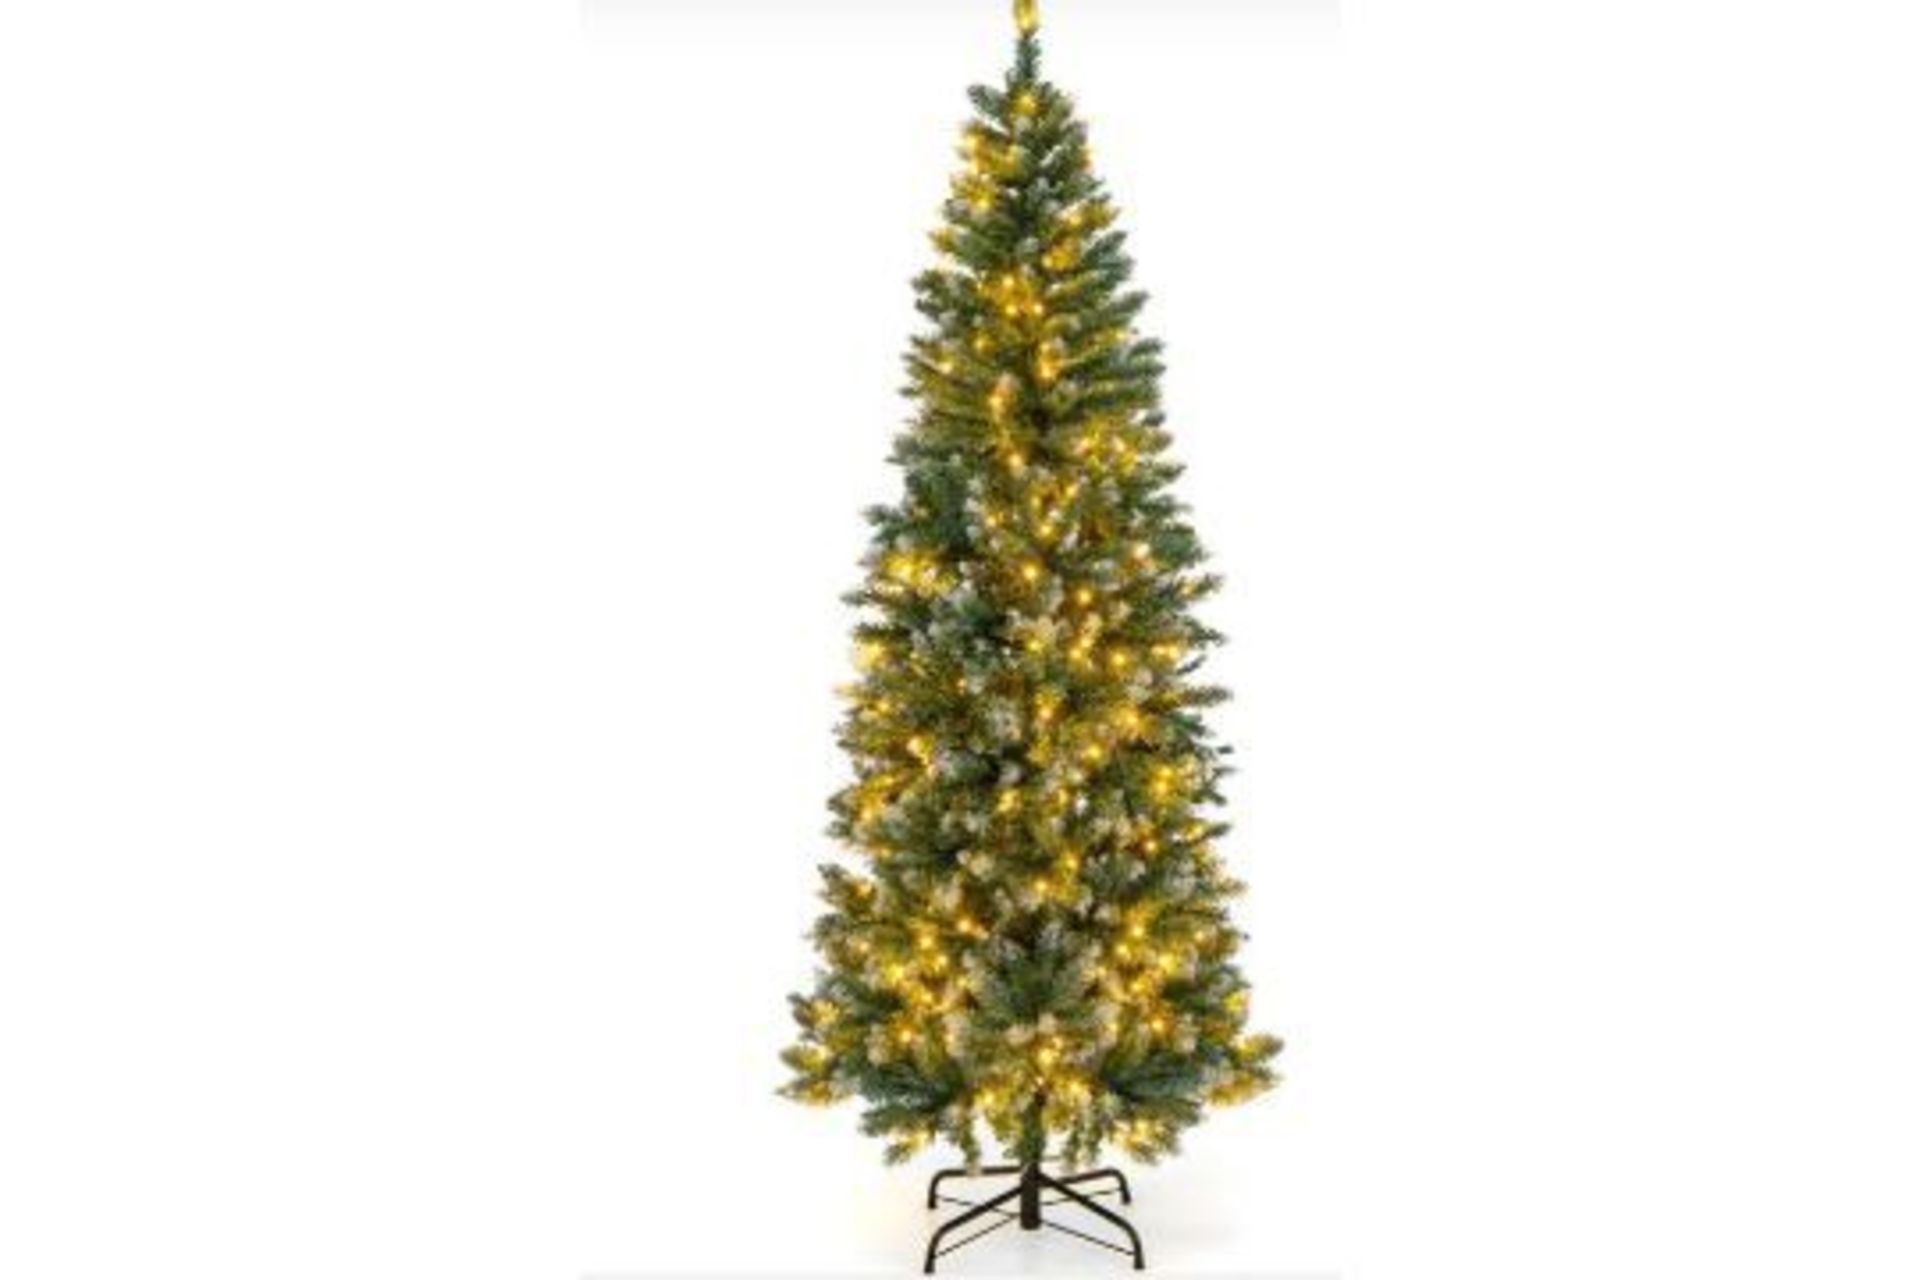 HINGED SLIM PENCIL XMAS TREE WITH 408/618 SNOWY BRANCH TIPS FOR HOME-180 CM. - R14.2.